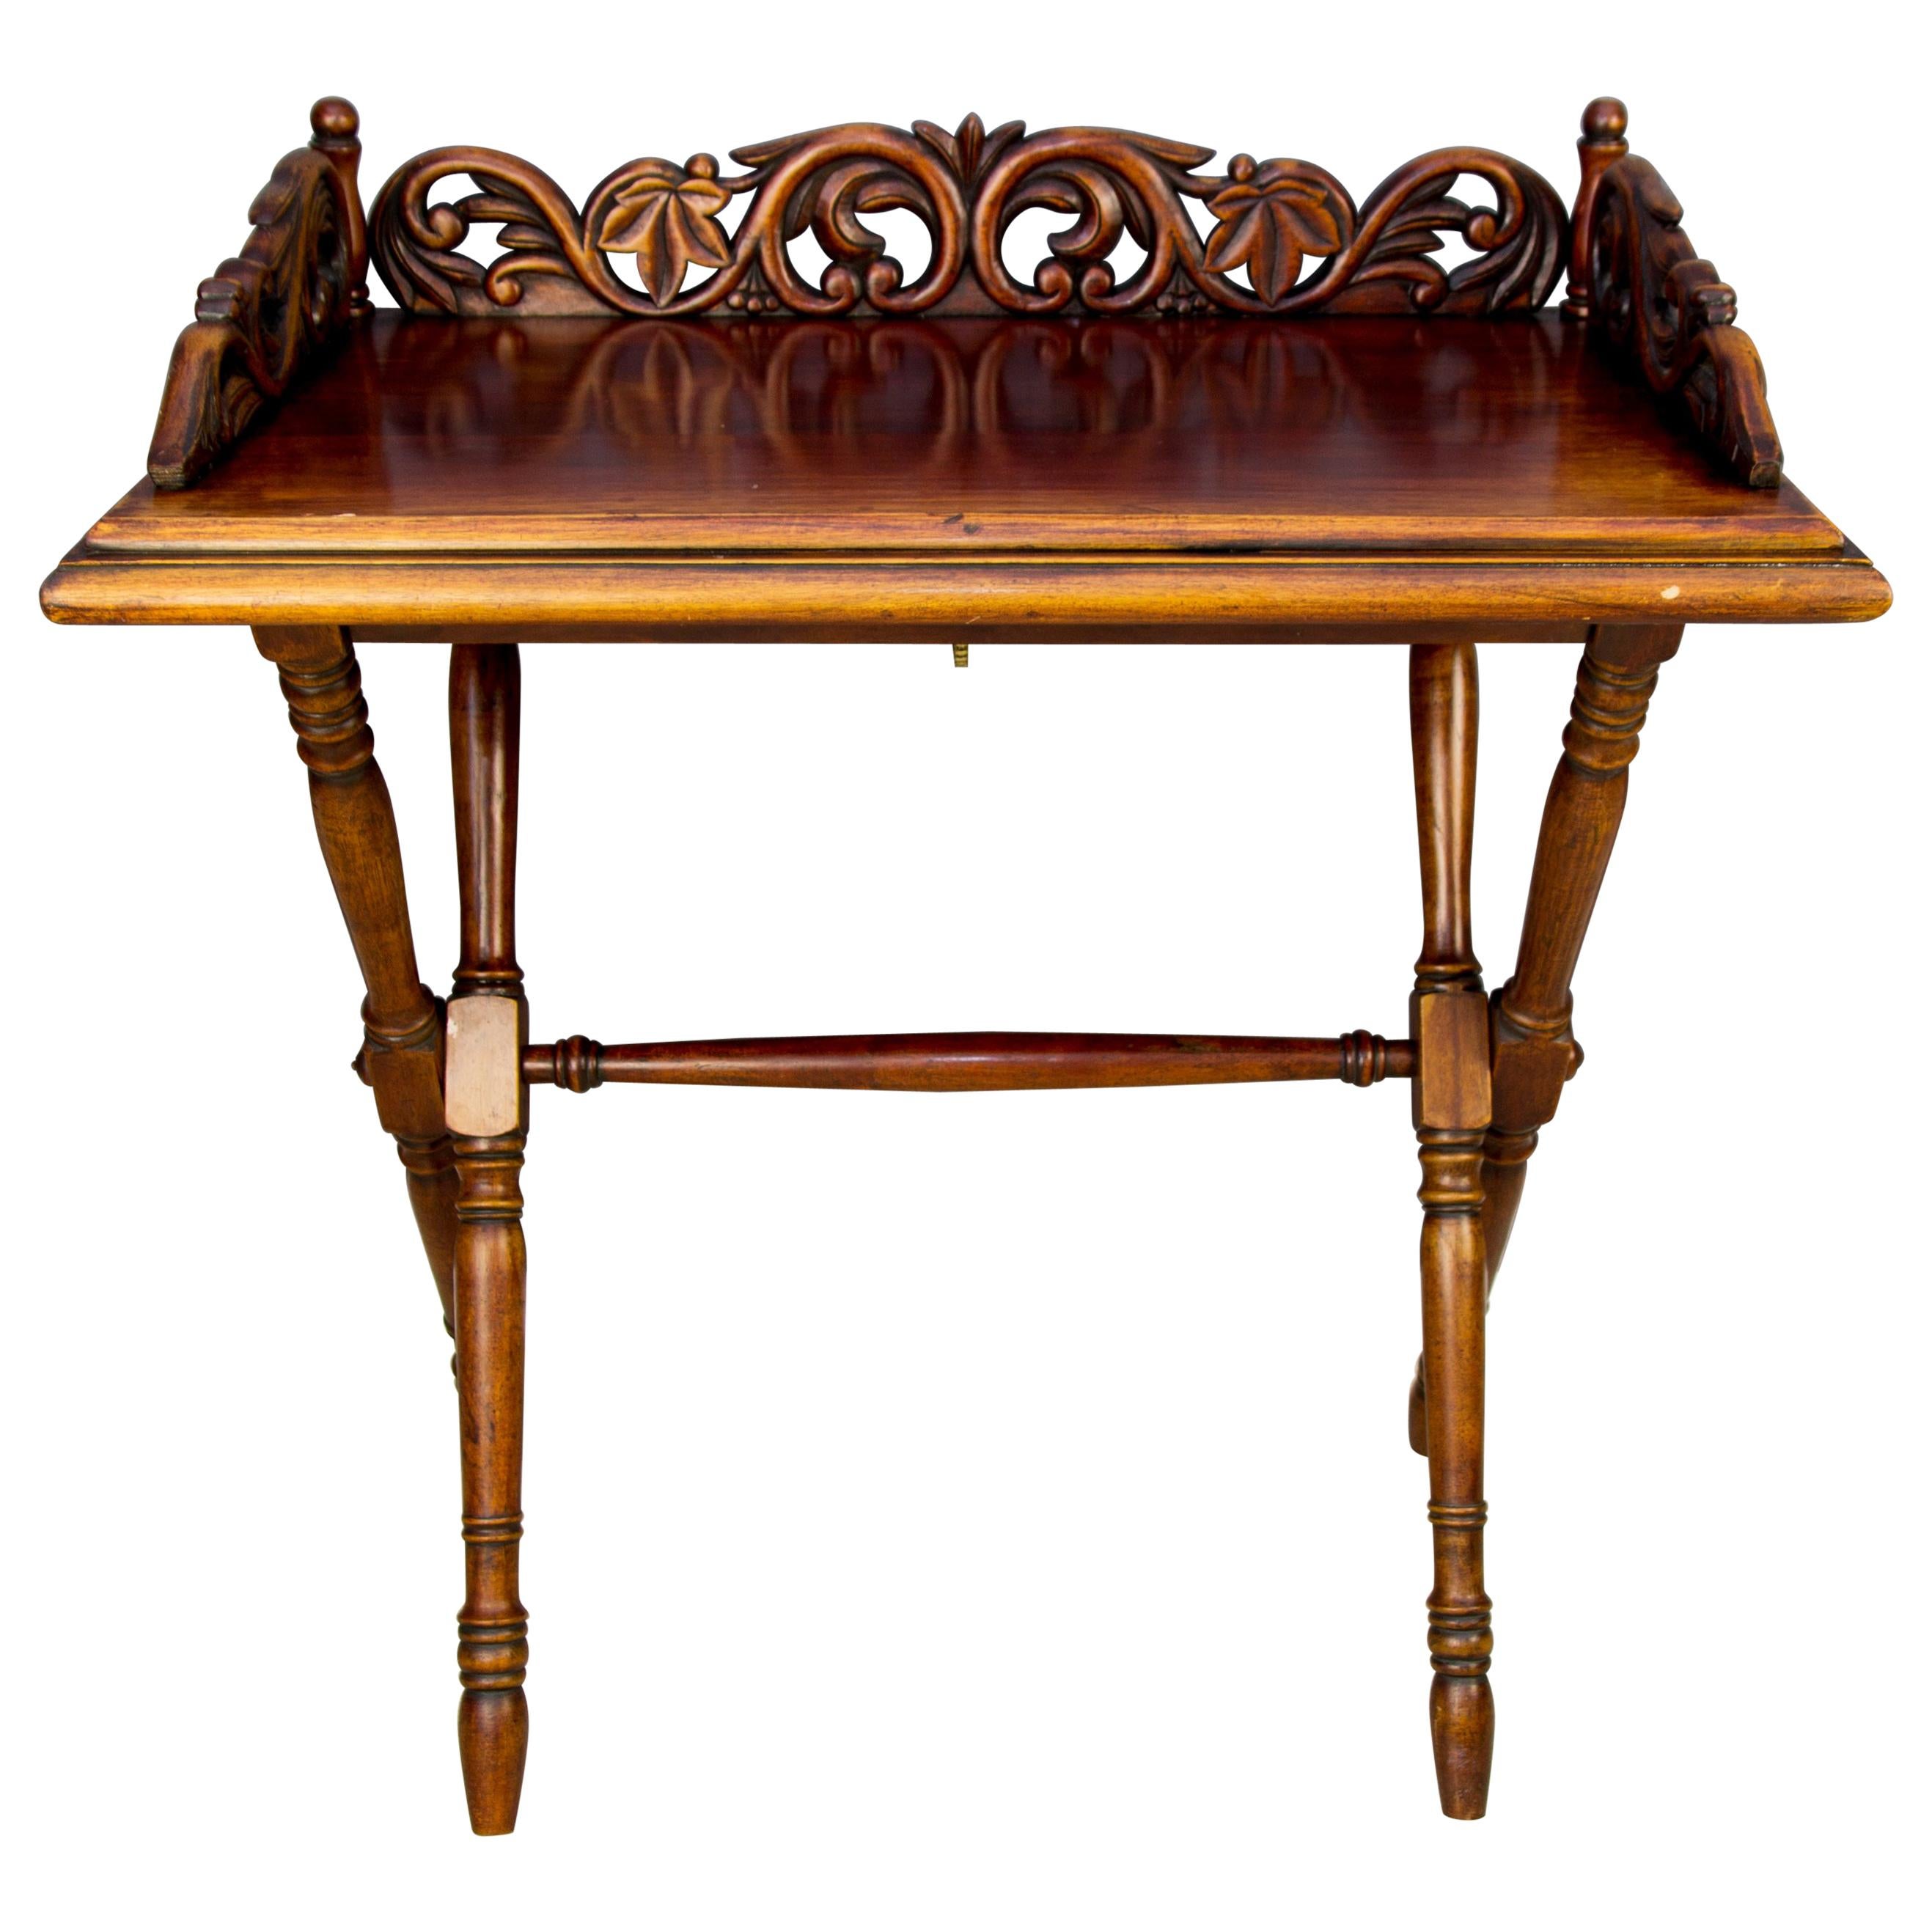 Victorian Style Ornate Carved Walnut Folding Table, circa 1920s